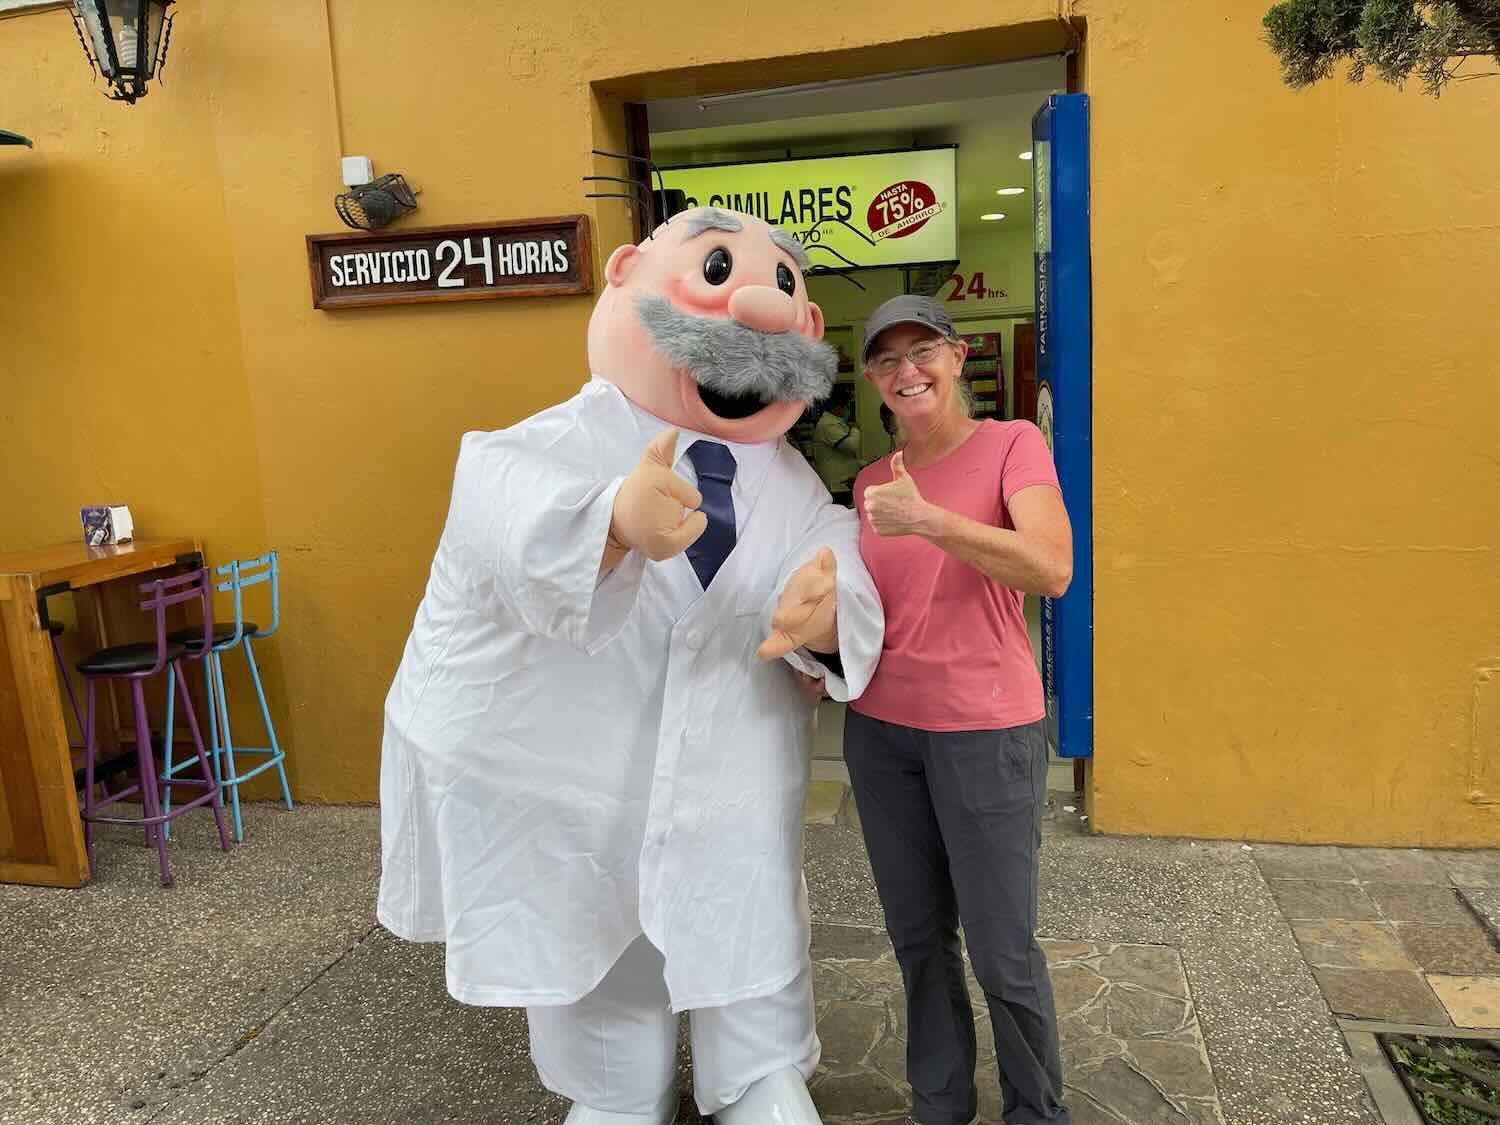 Hanging out with Dr. Simi, the cartoon mascot of a Mexican pharmacy chain